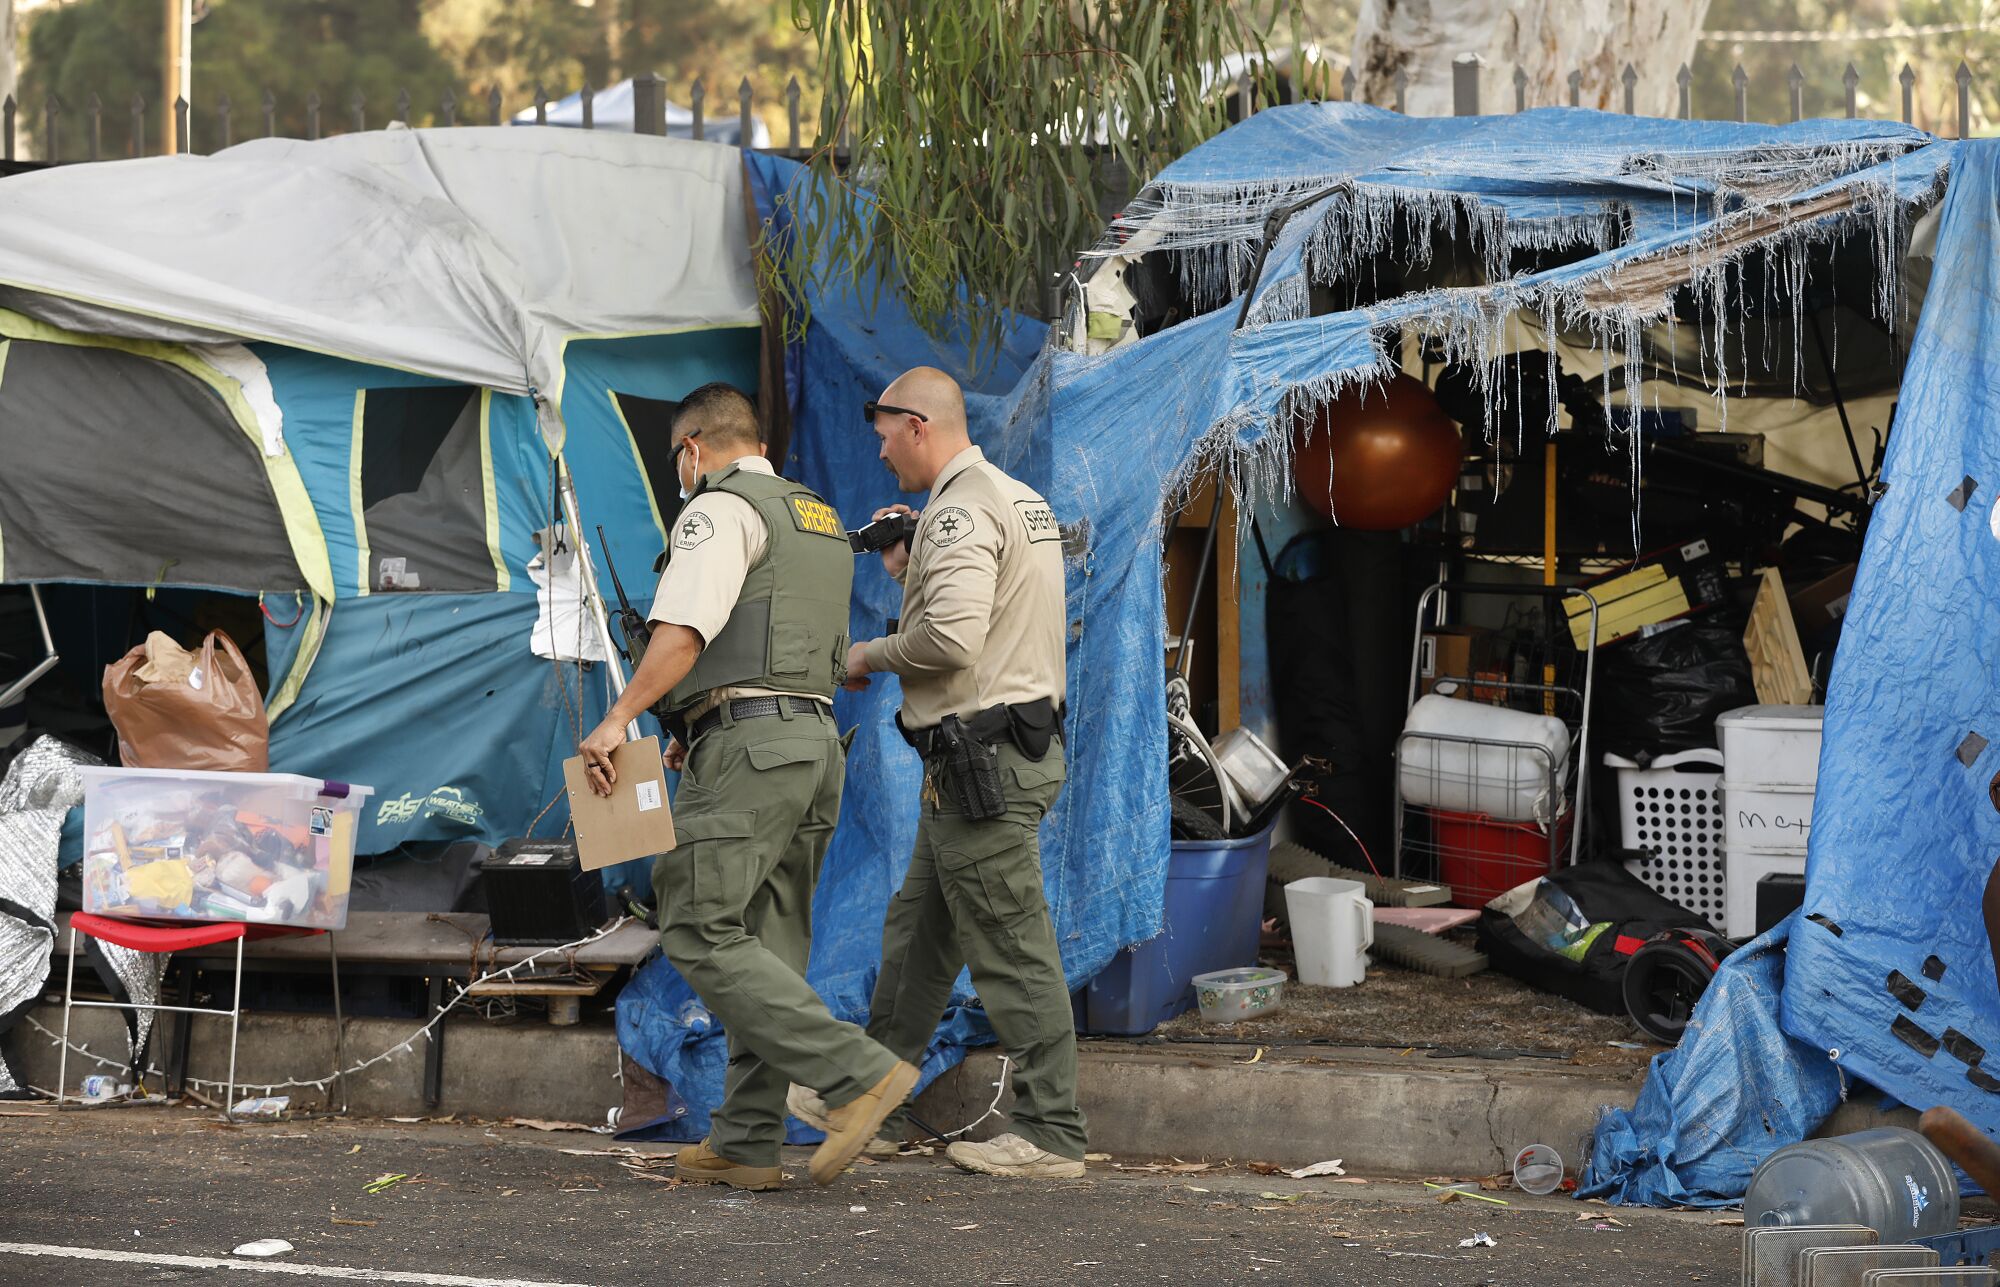 L.A. County sheriff's deputies helped homeless veterans pack up to leave their encampment.